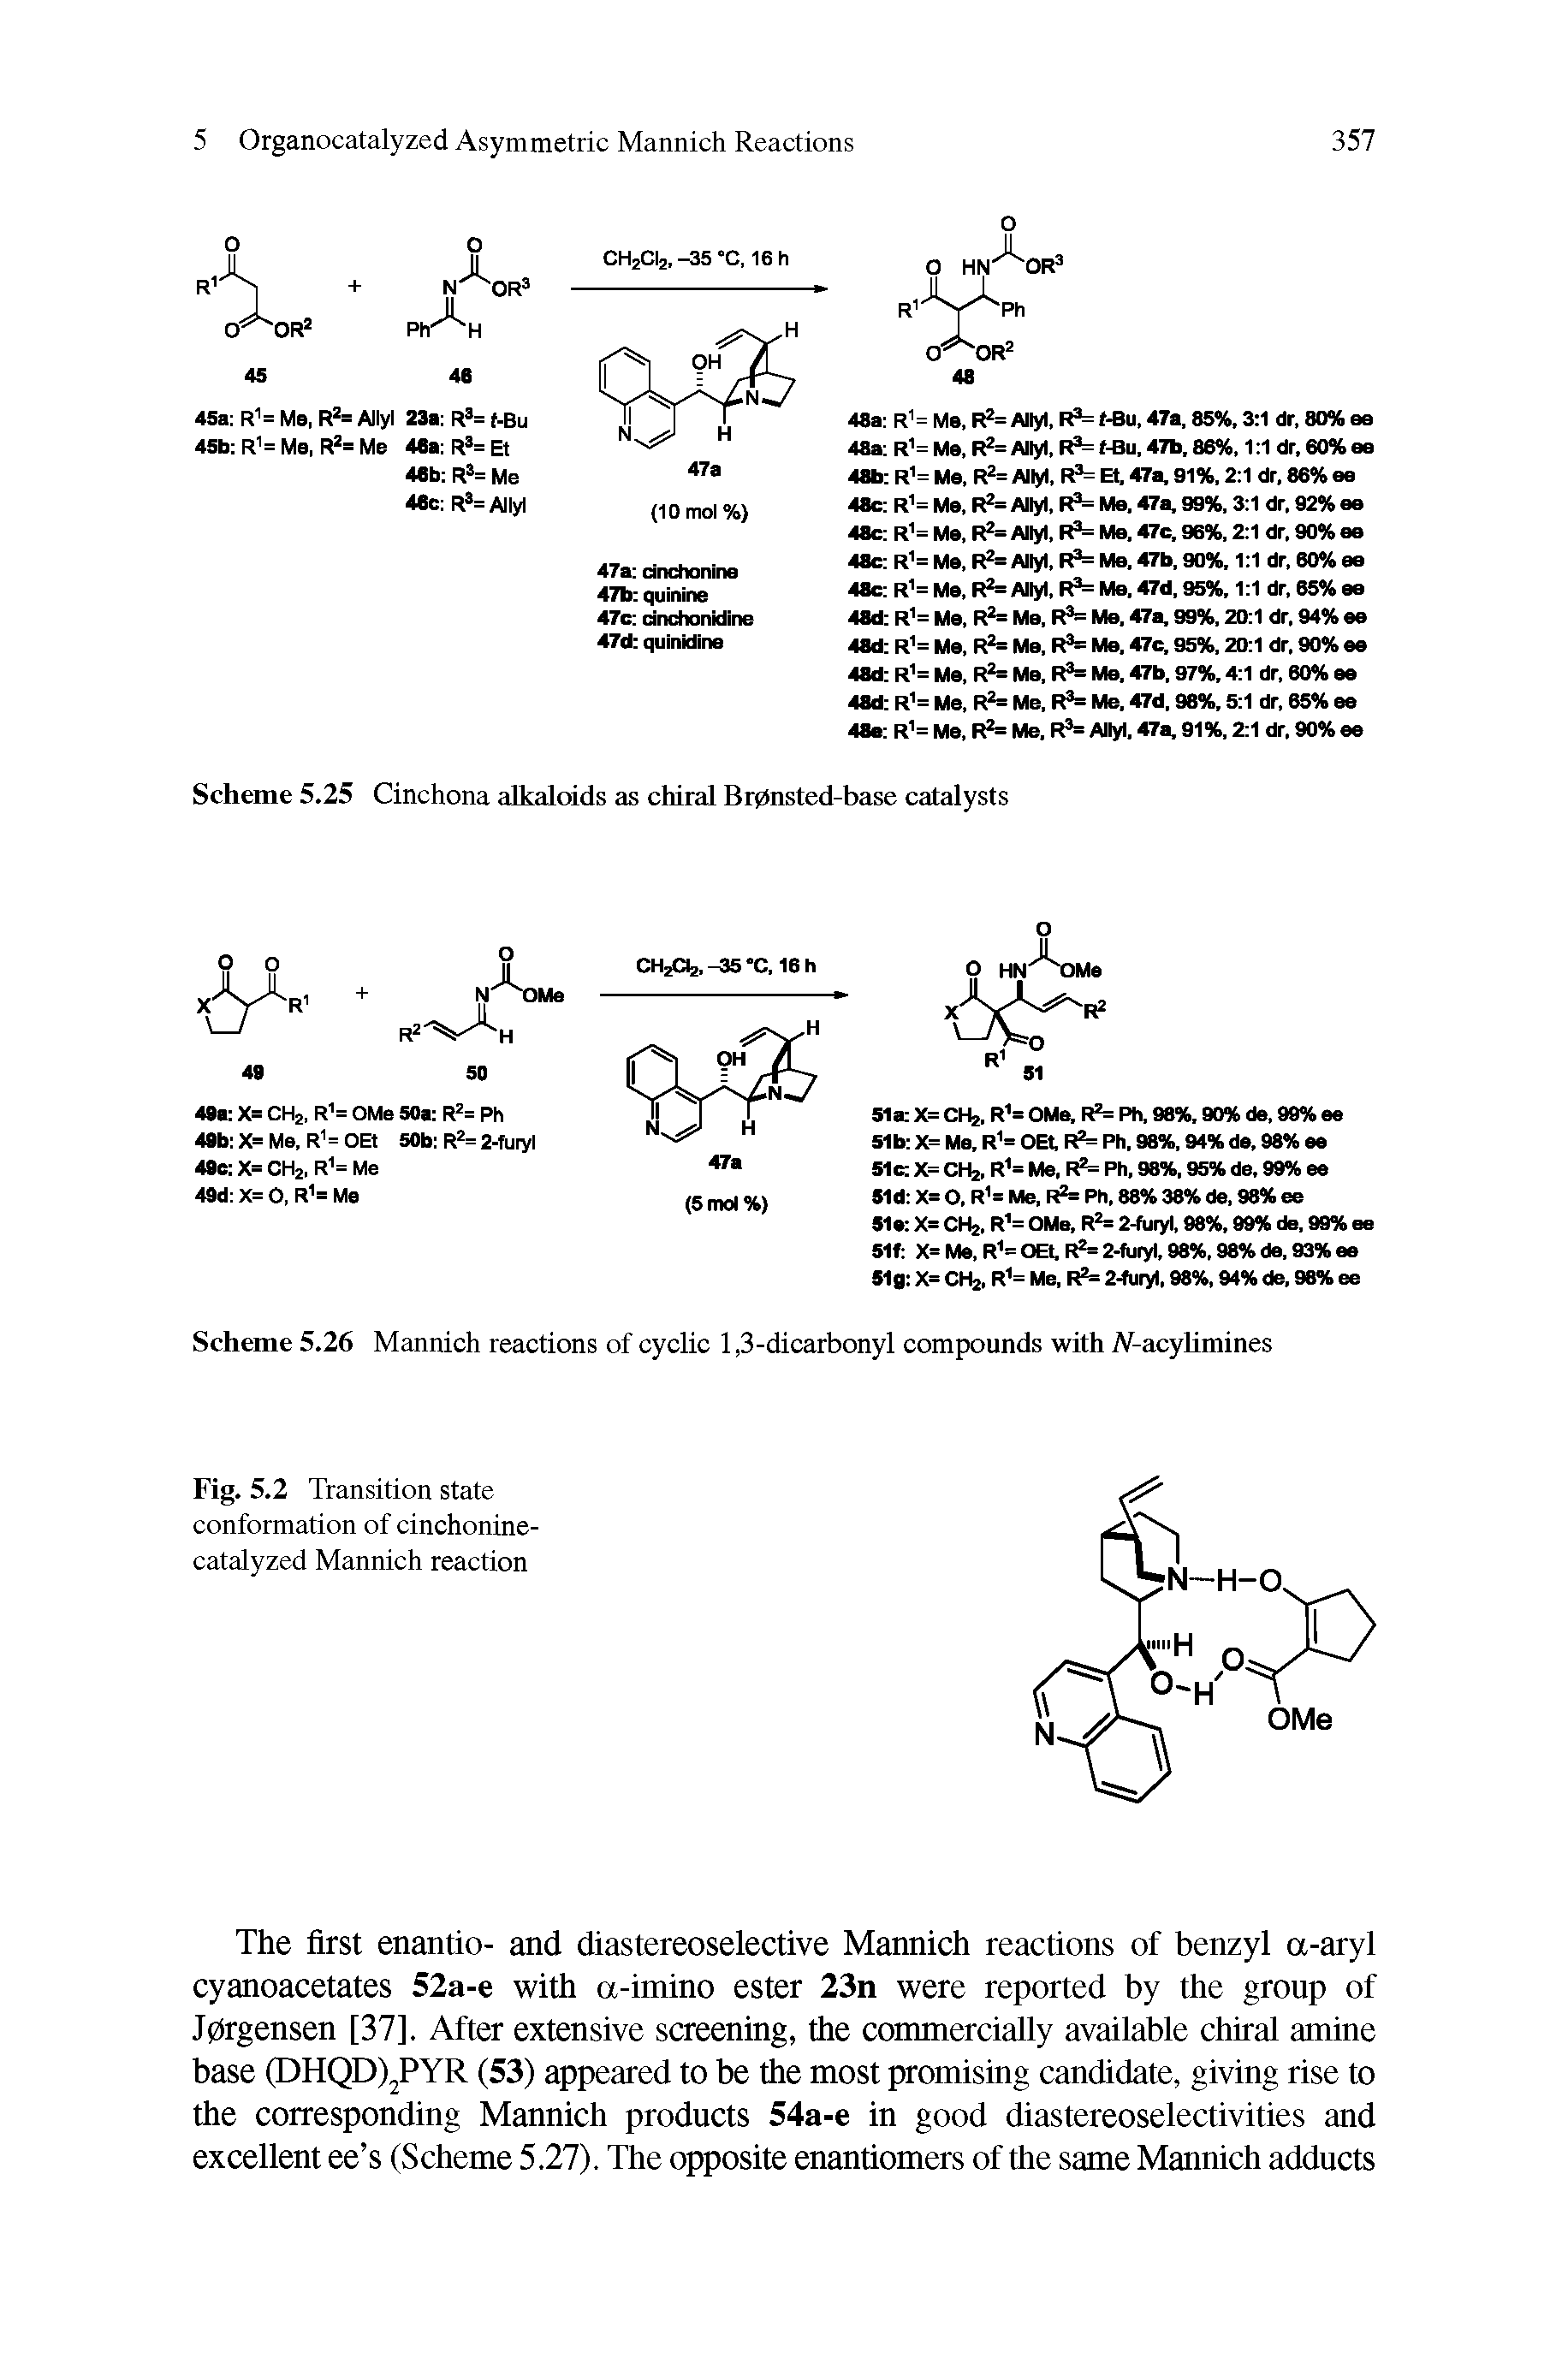 Scheme 5.25 Cinchona alkaloids as chiral Br0nsted-base catalysts...